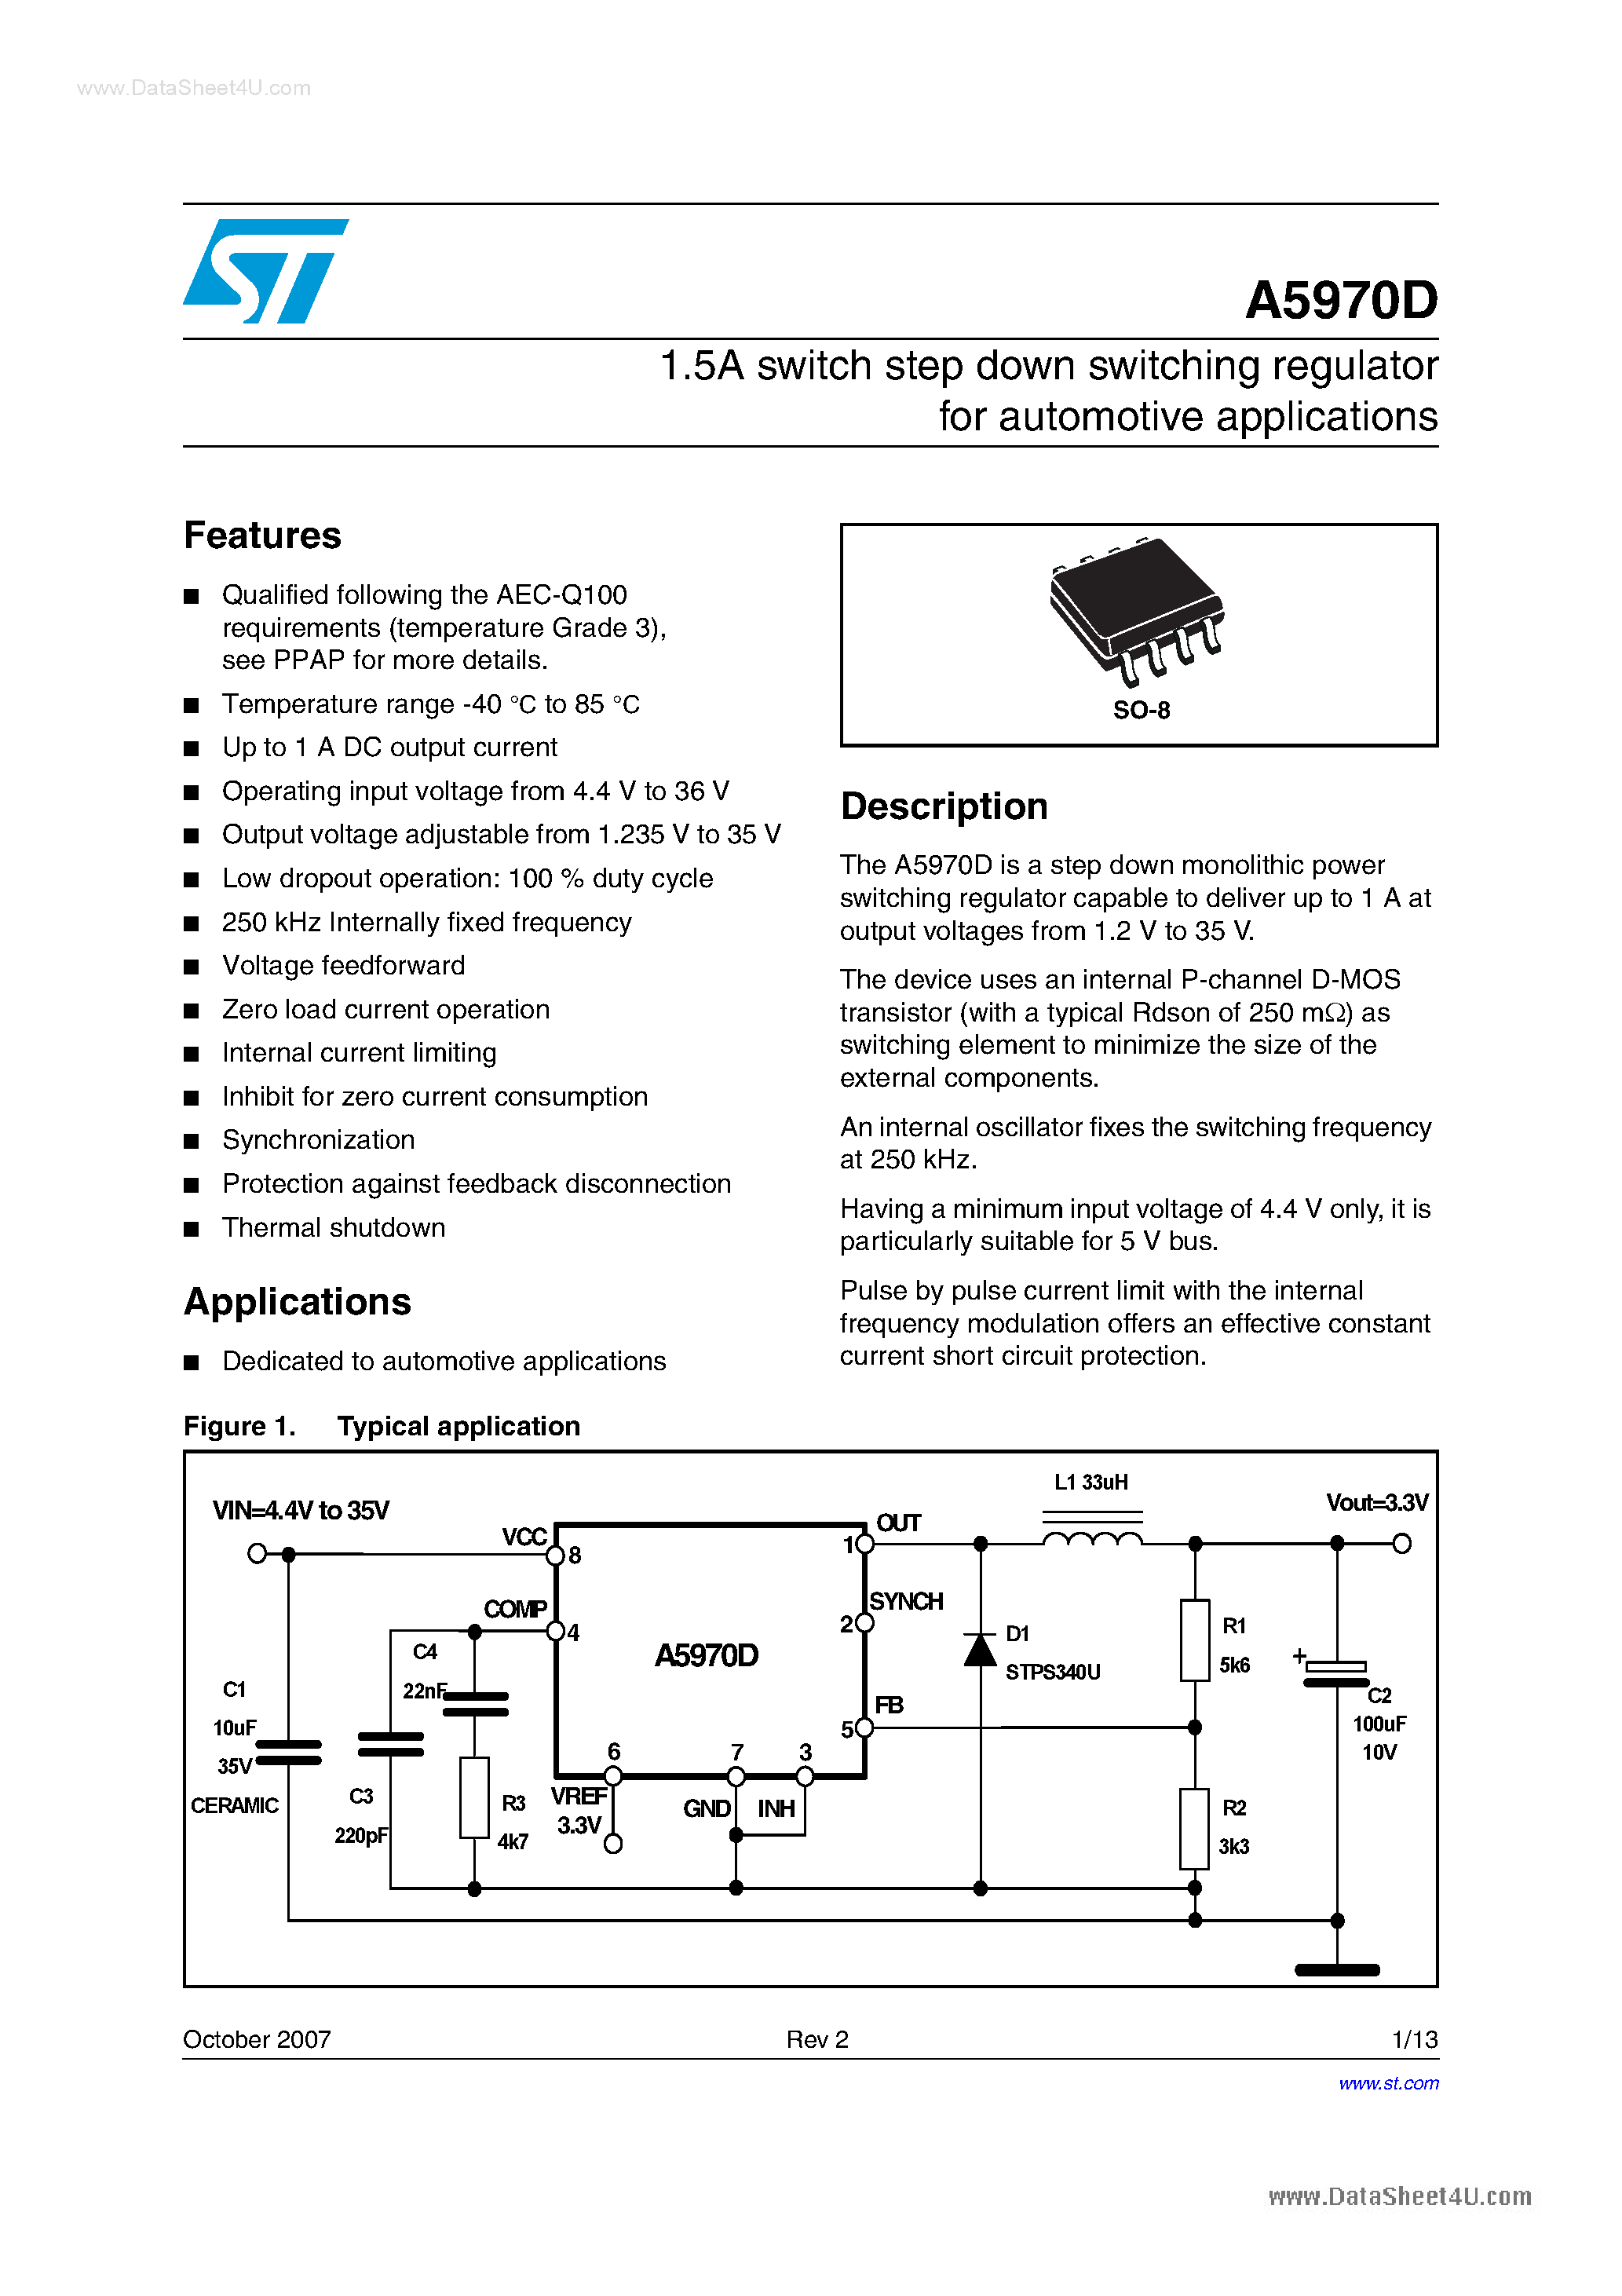 Datasheet A5970D - 1.5A switch step down switching regulator page 1